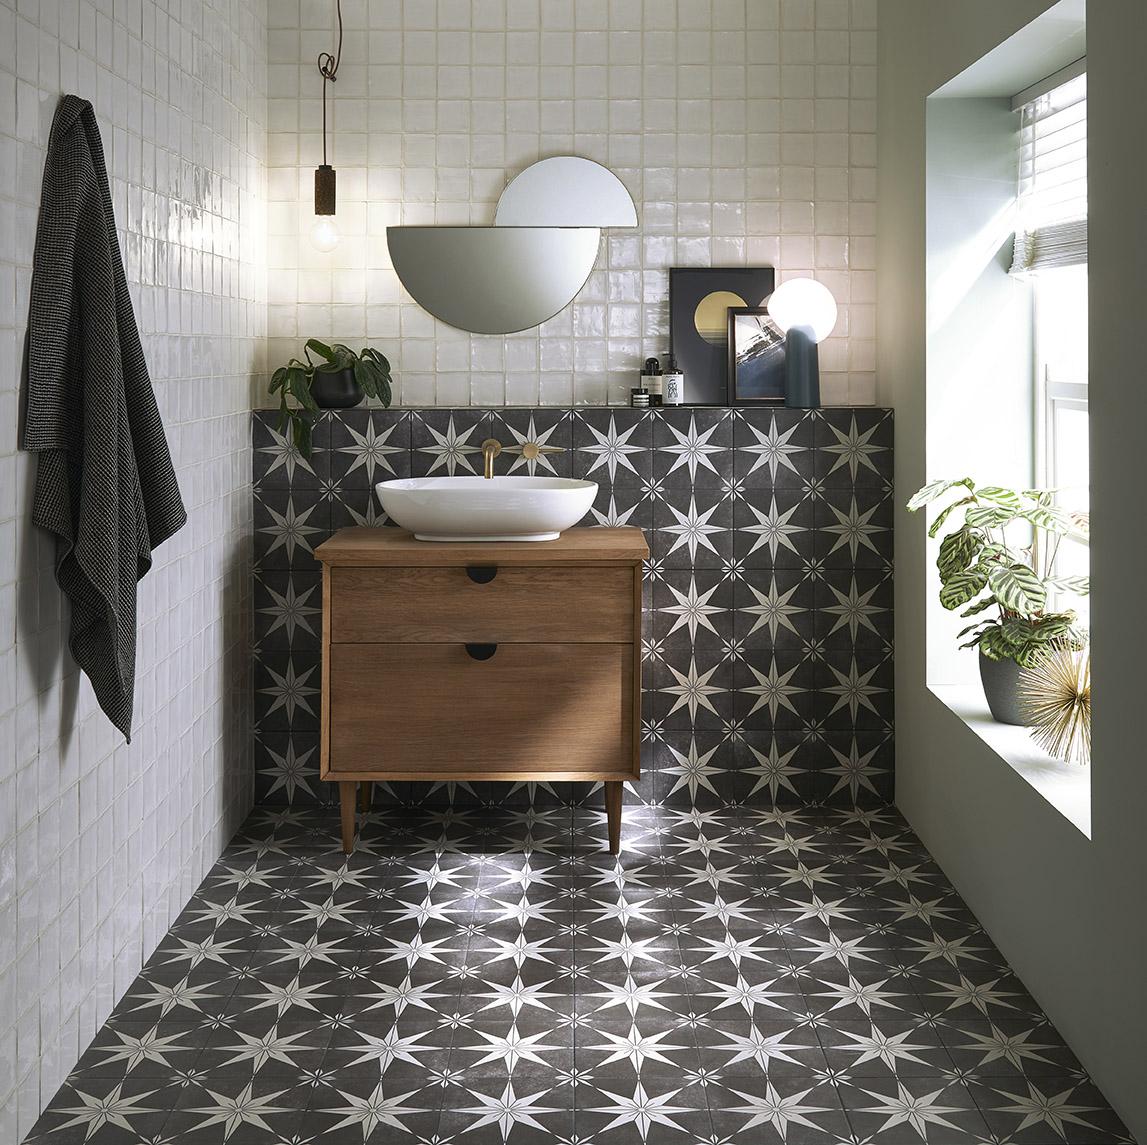 Clean Grout On Floor And Wall Tile, Are Dark Tiles Hard To Keep Clean